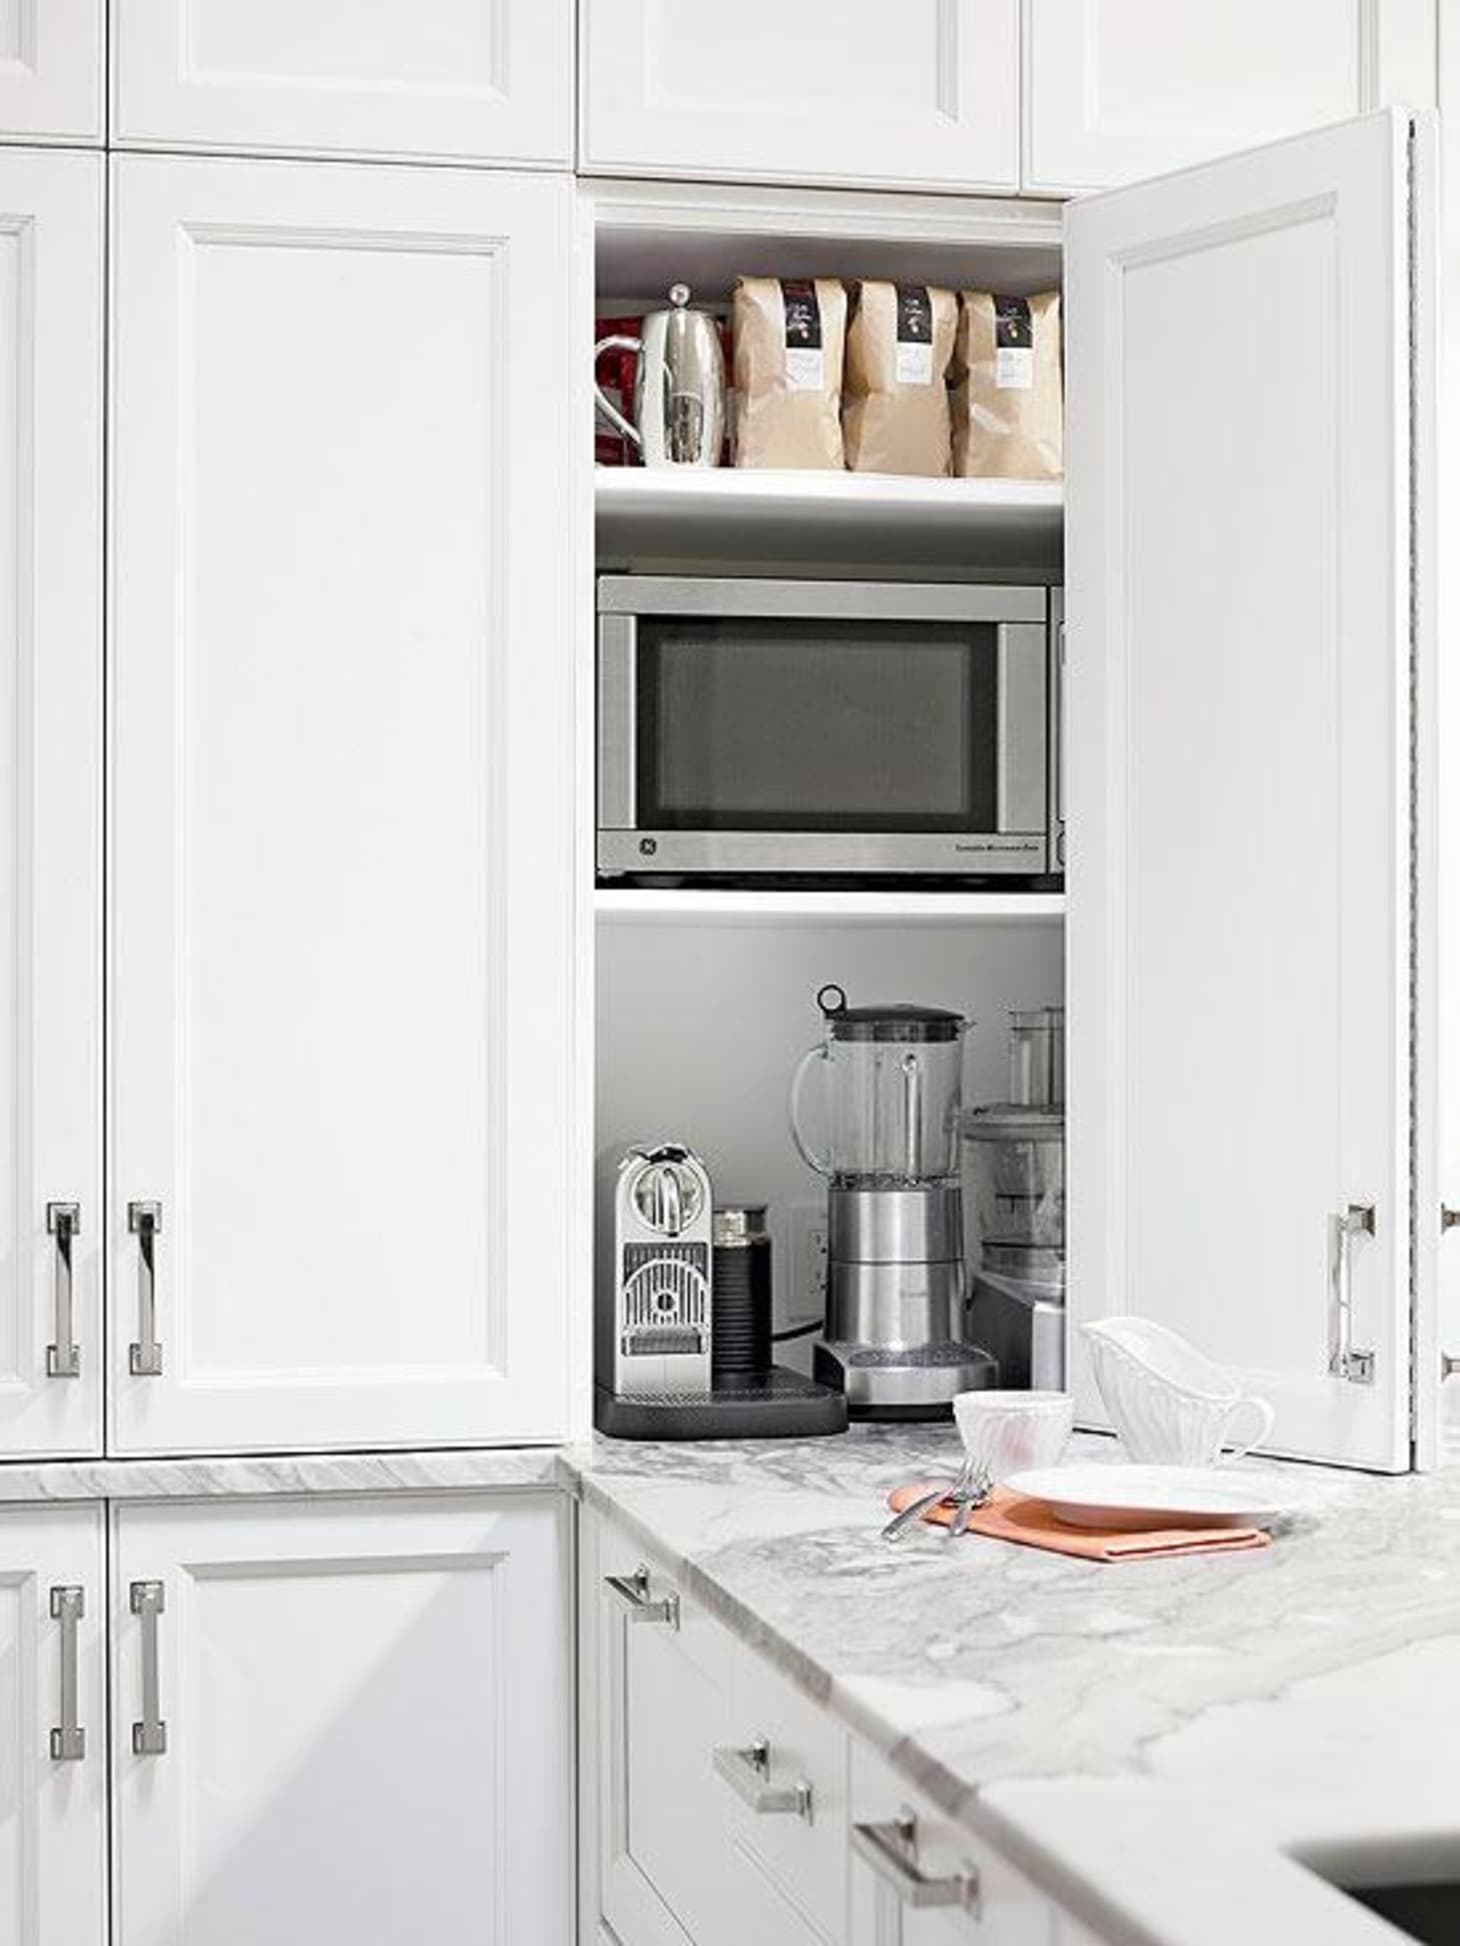 Microwaves In The Kitchen Hidden Storage Solutions Apartment